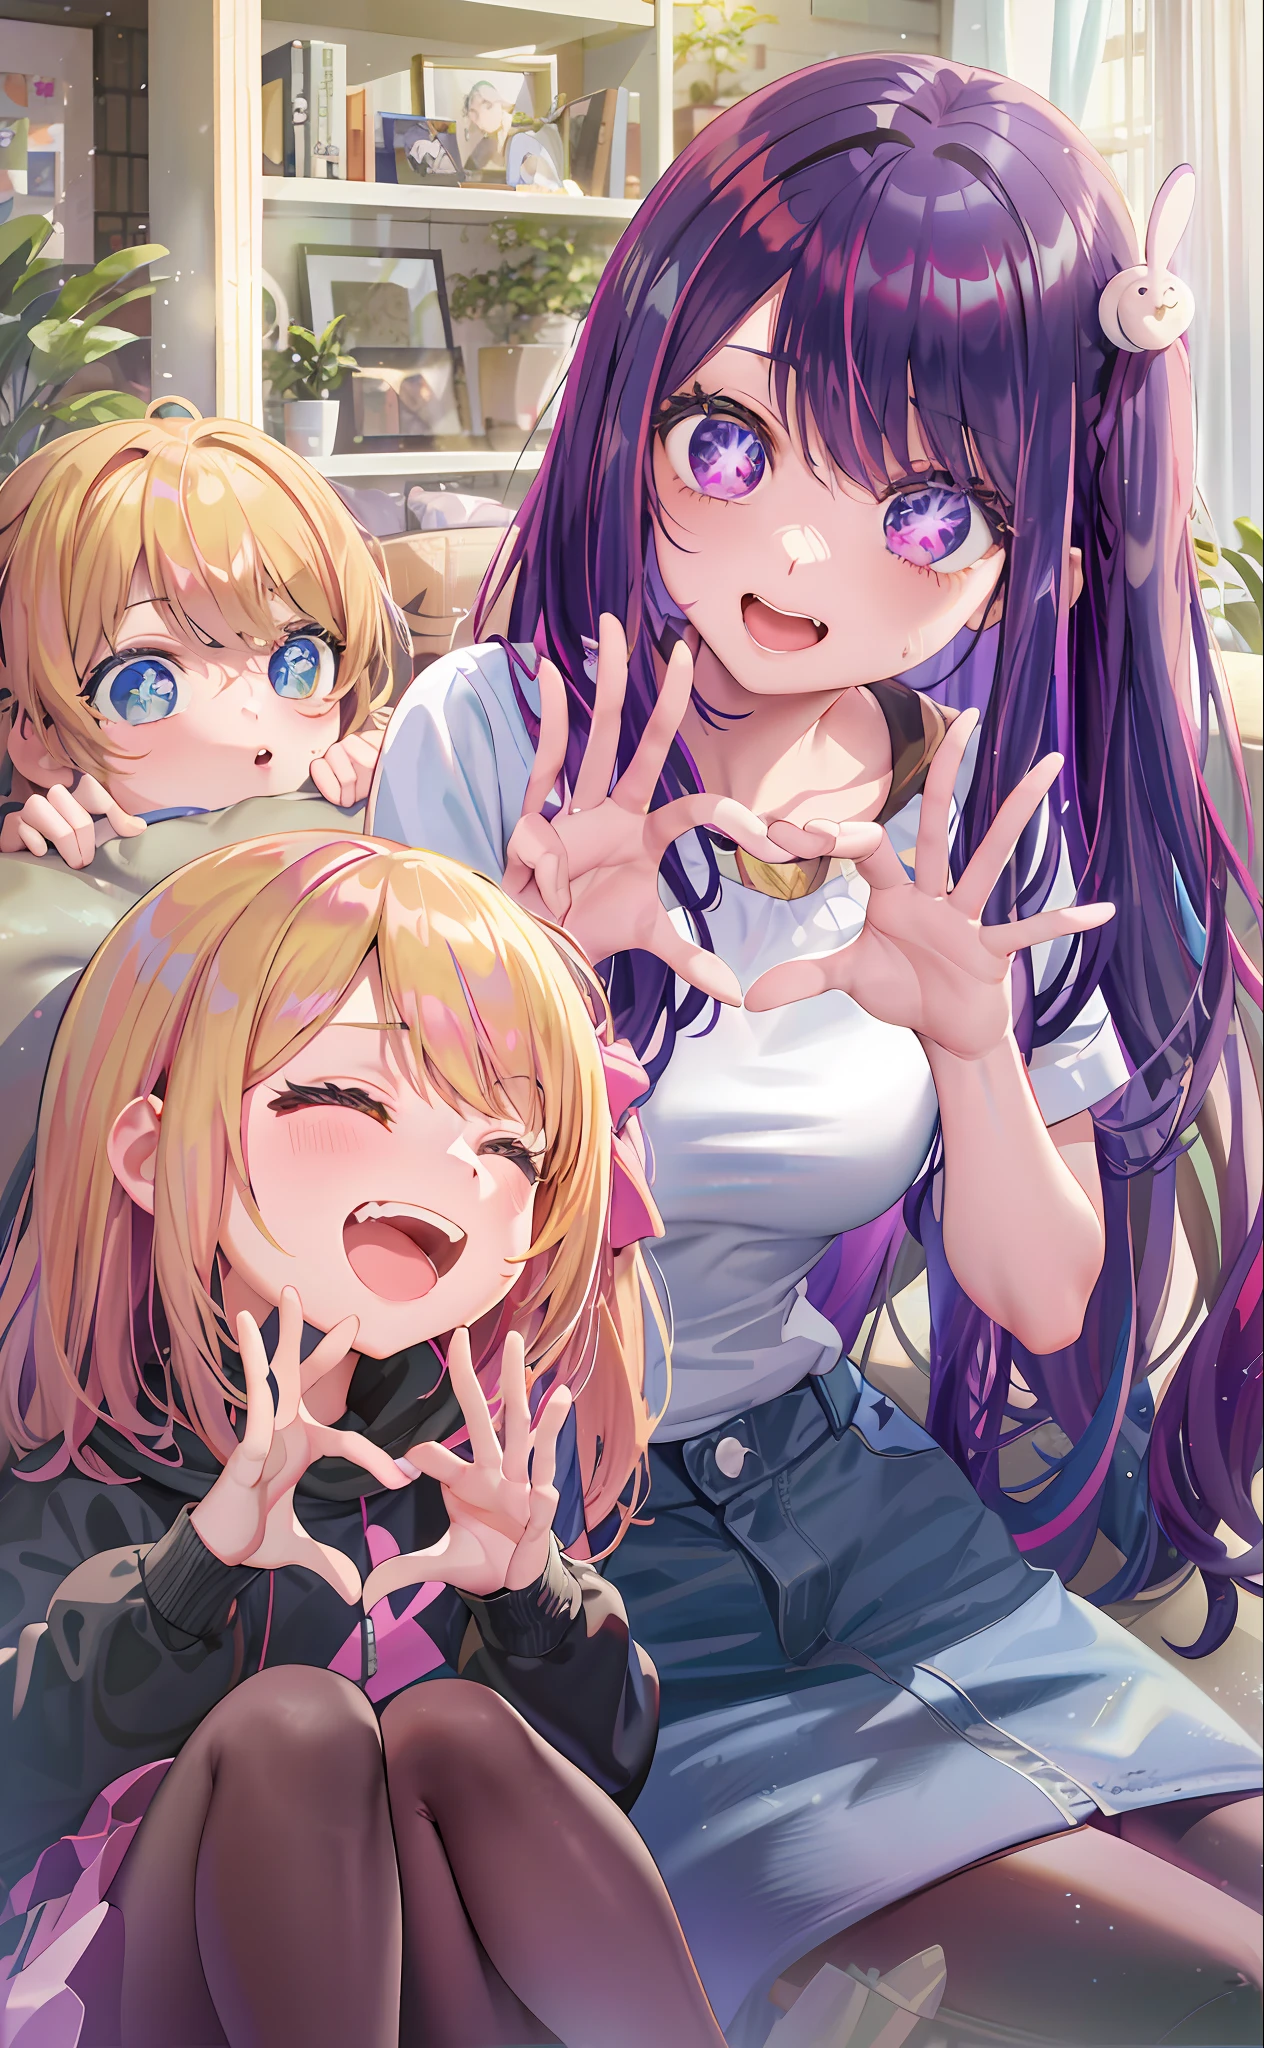 anime girl with purple hair and two other girls sitting on a couch, hololive, visual novels CG, Edgeie anime style, Kawaii realistic portrait, visual novel key visual, ; visual novel, eechi, Smooth anime CG art, DDLC, Edgee style, visual novel, Splash art anime , anime moe art style, Anime! 4K